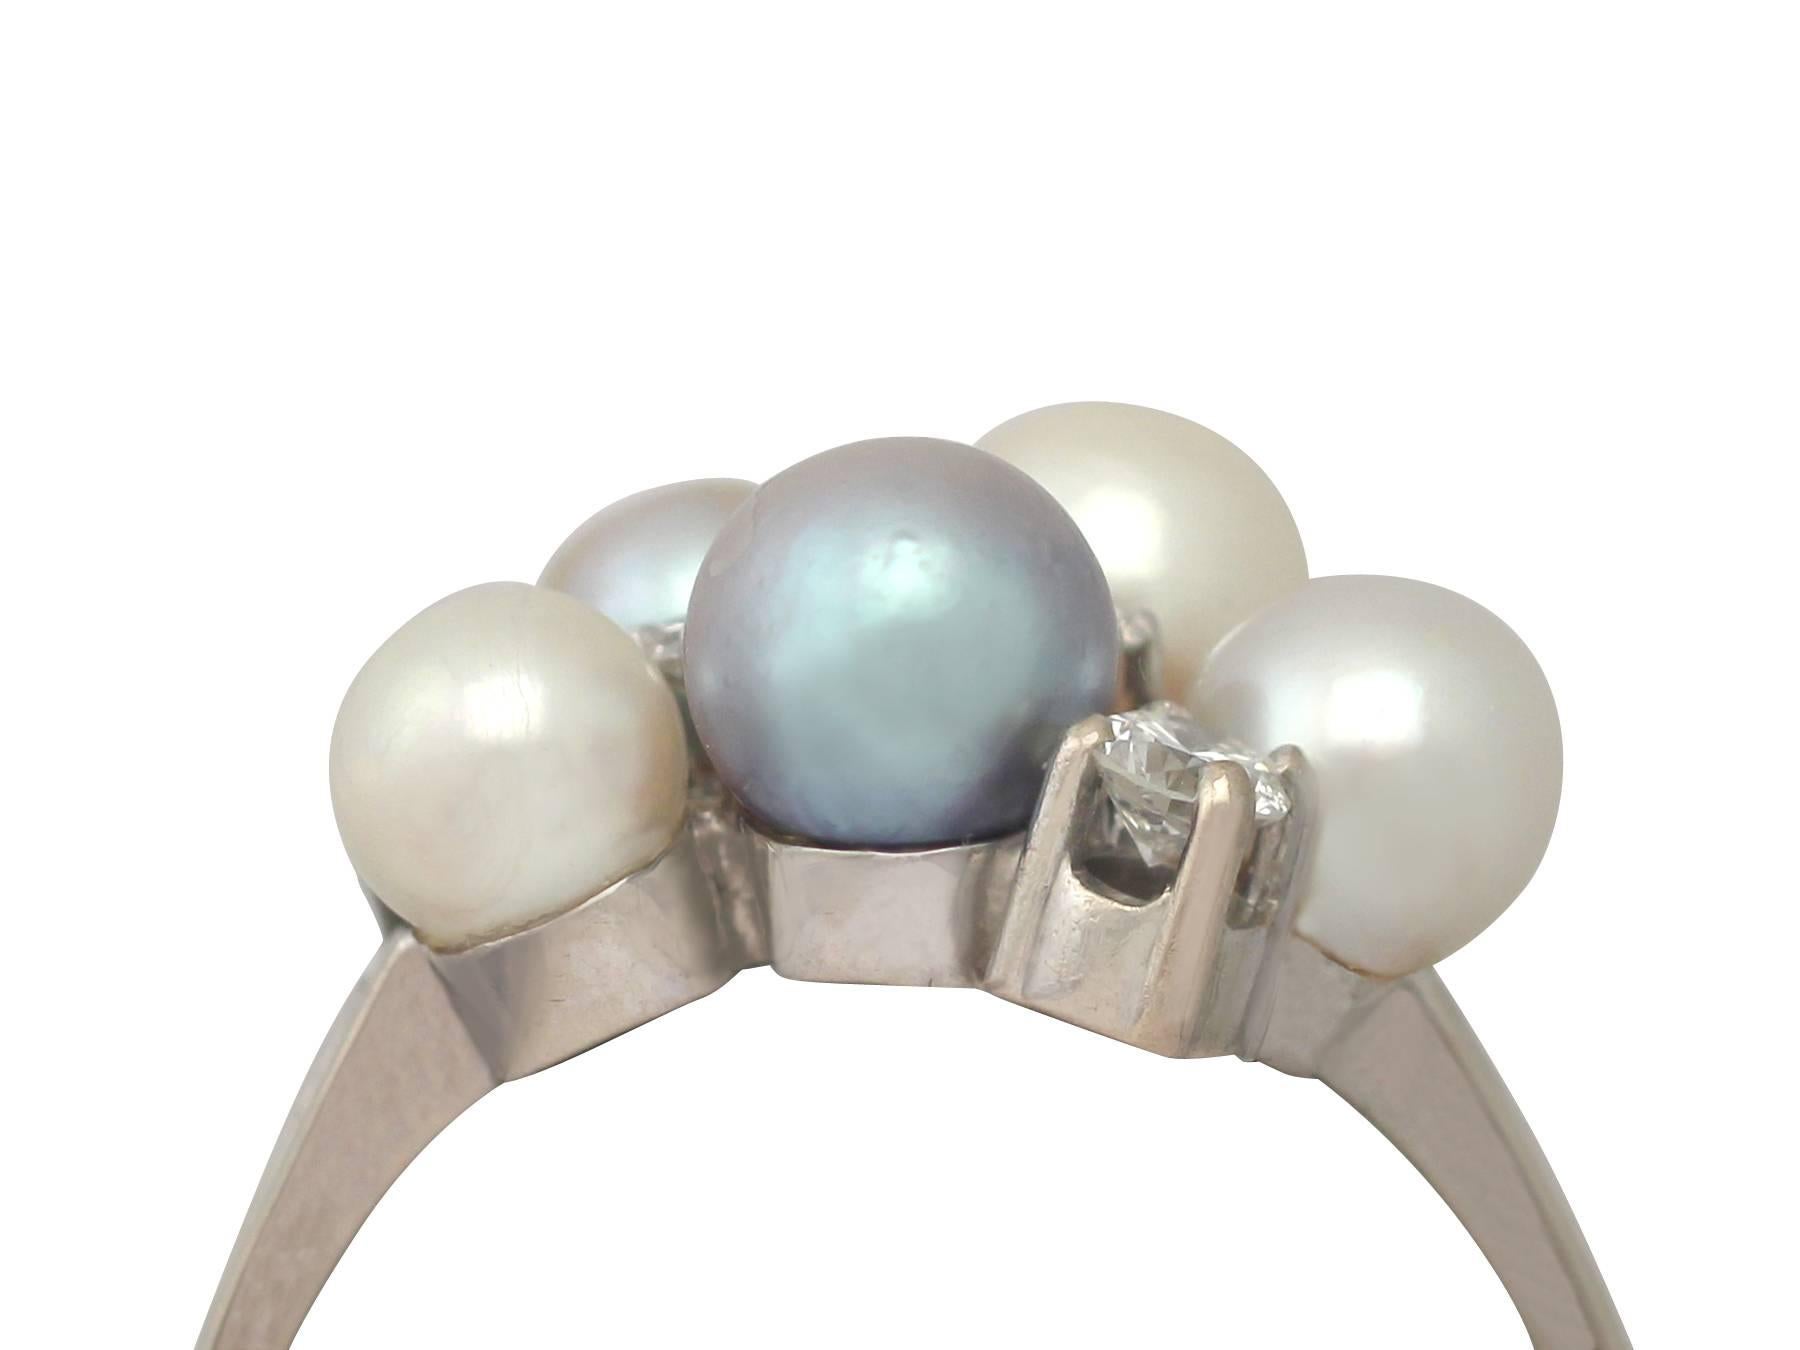 A fine and impressive vintage cultured pearl and 0.55 carat diamond, 14 carat white gold dress ring; part of our diverse vintage jewellery collections.

This fine and impressive vintage cultured pearl ring has been crafted in 14 ct white gold.

The